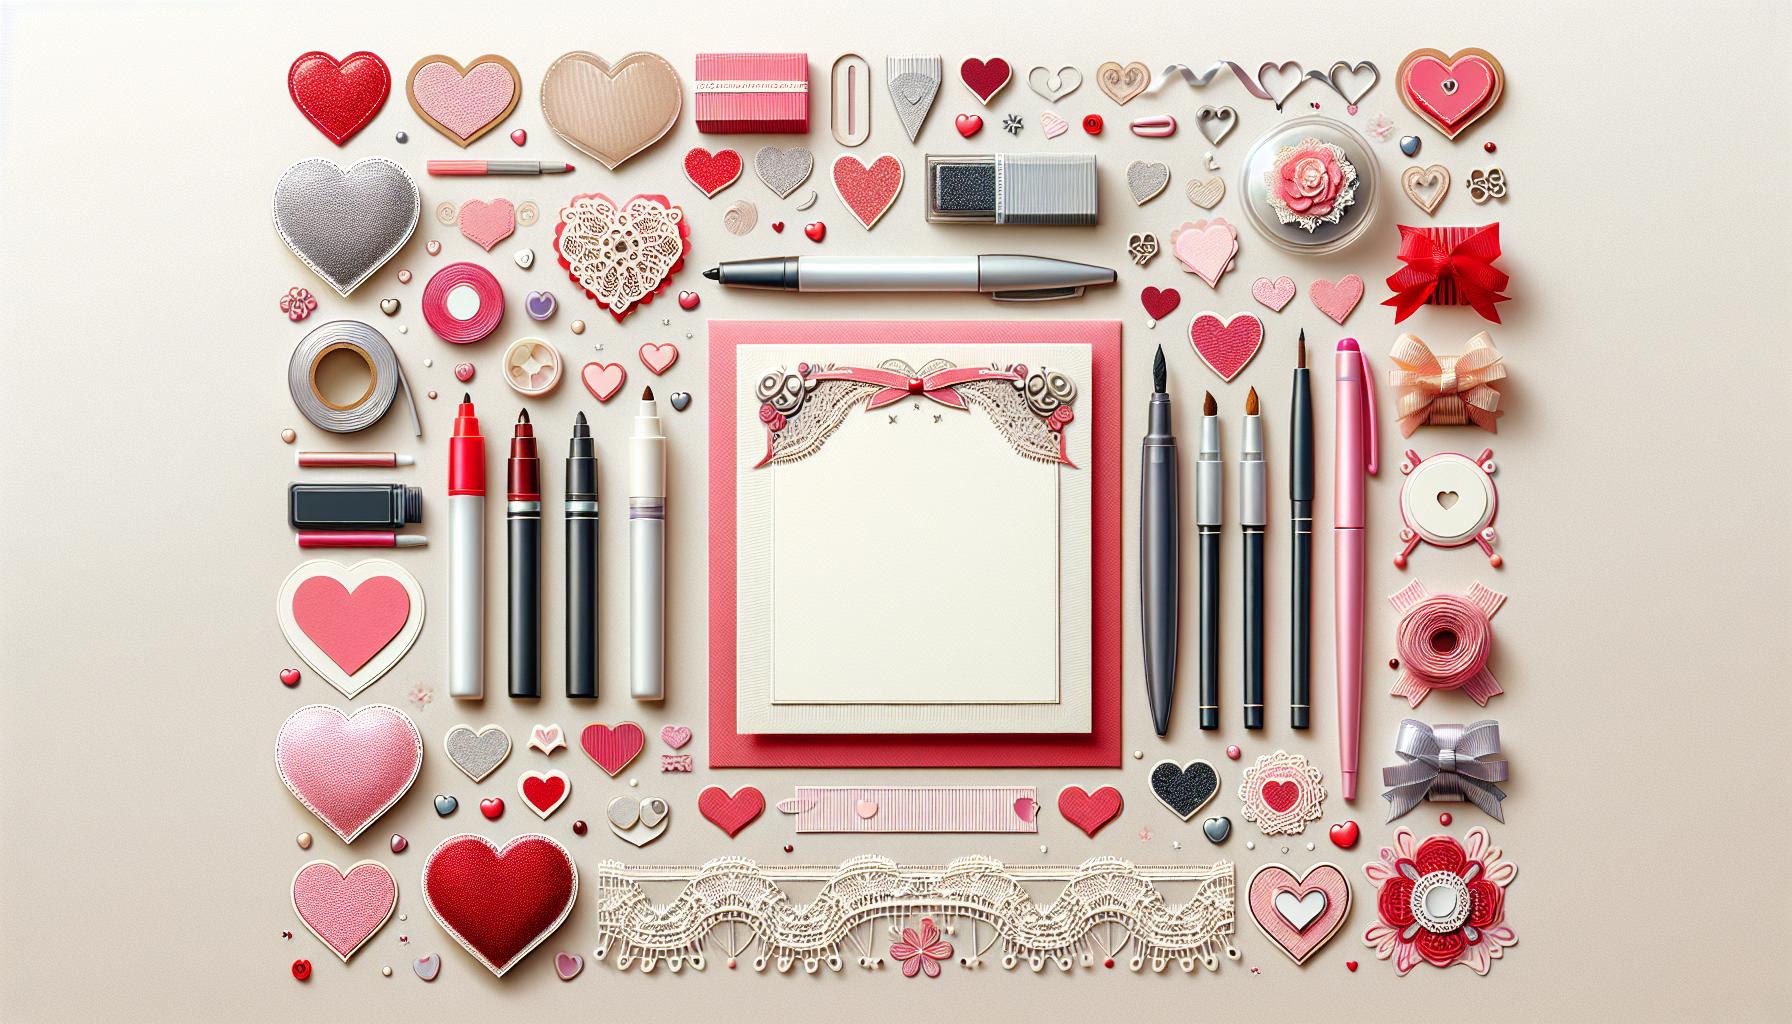 DIY Cool Valentine's Cards: Personal Touches That Impress